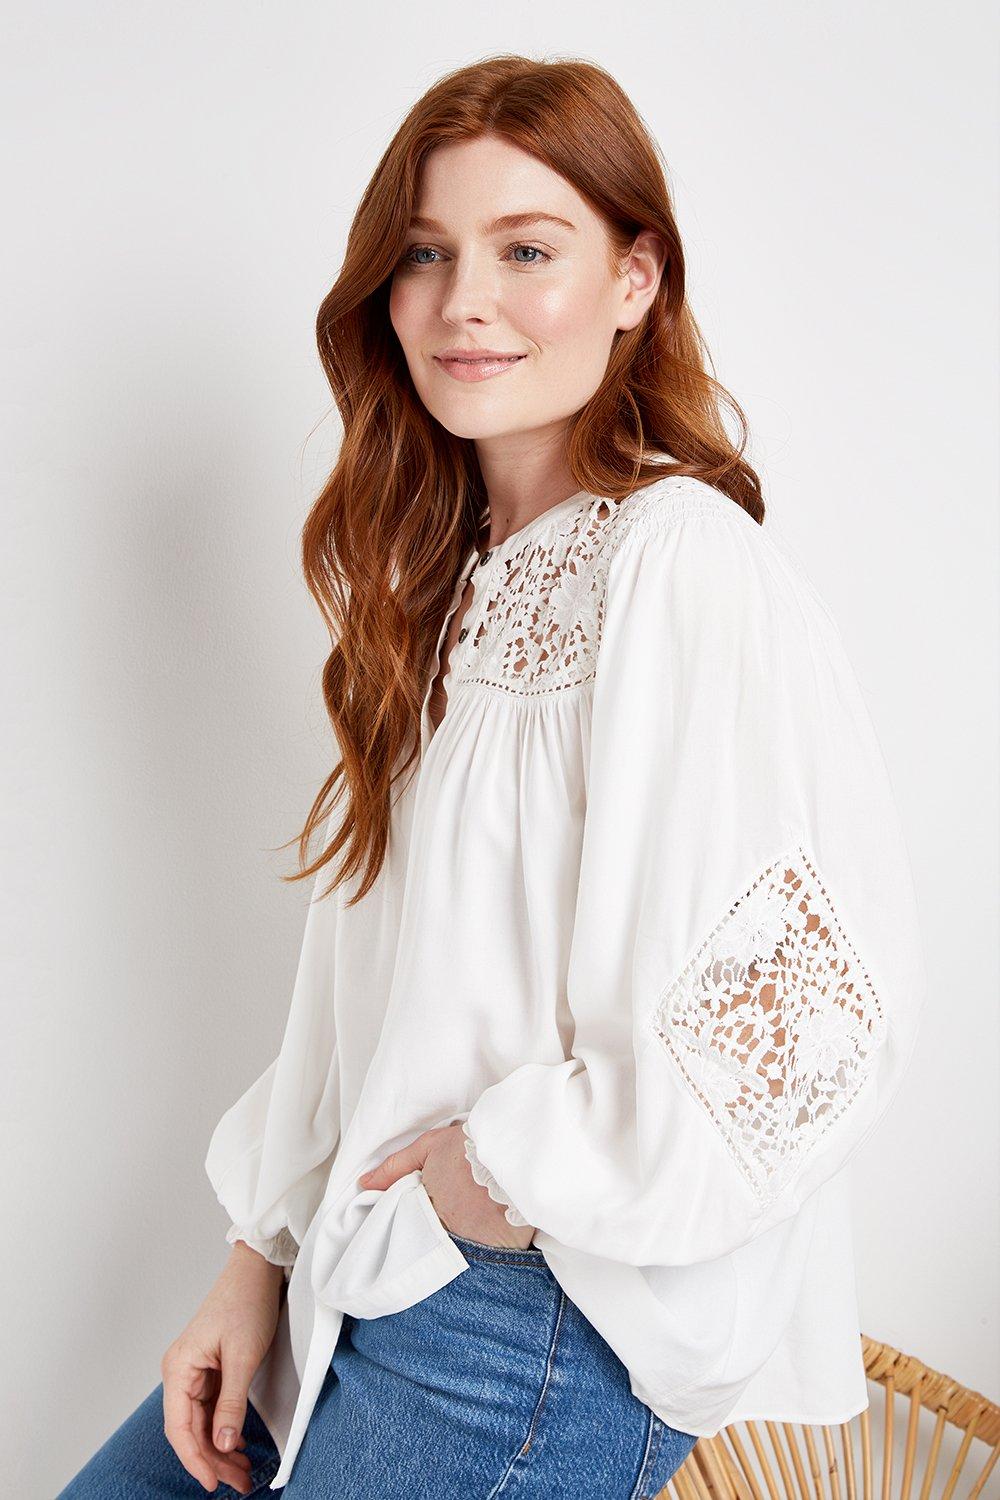 This Elegant Top Is Perfect For Your New Season Wardrobe. Crochet Inserts Bring A Summery Boho Feel, Whilst A Relaxed Fit And Chic White Design Are Sure To Flatter. Wear With Jeans And Trainers For Easy Everyday Style,  Top Long Sleeve Relaxed Casual